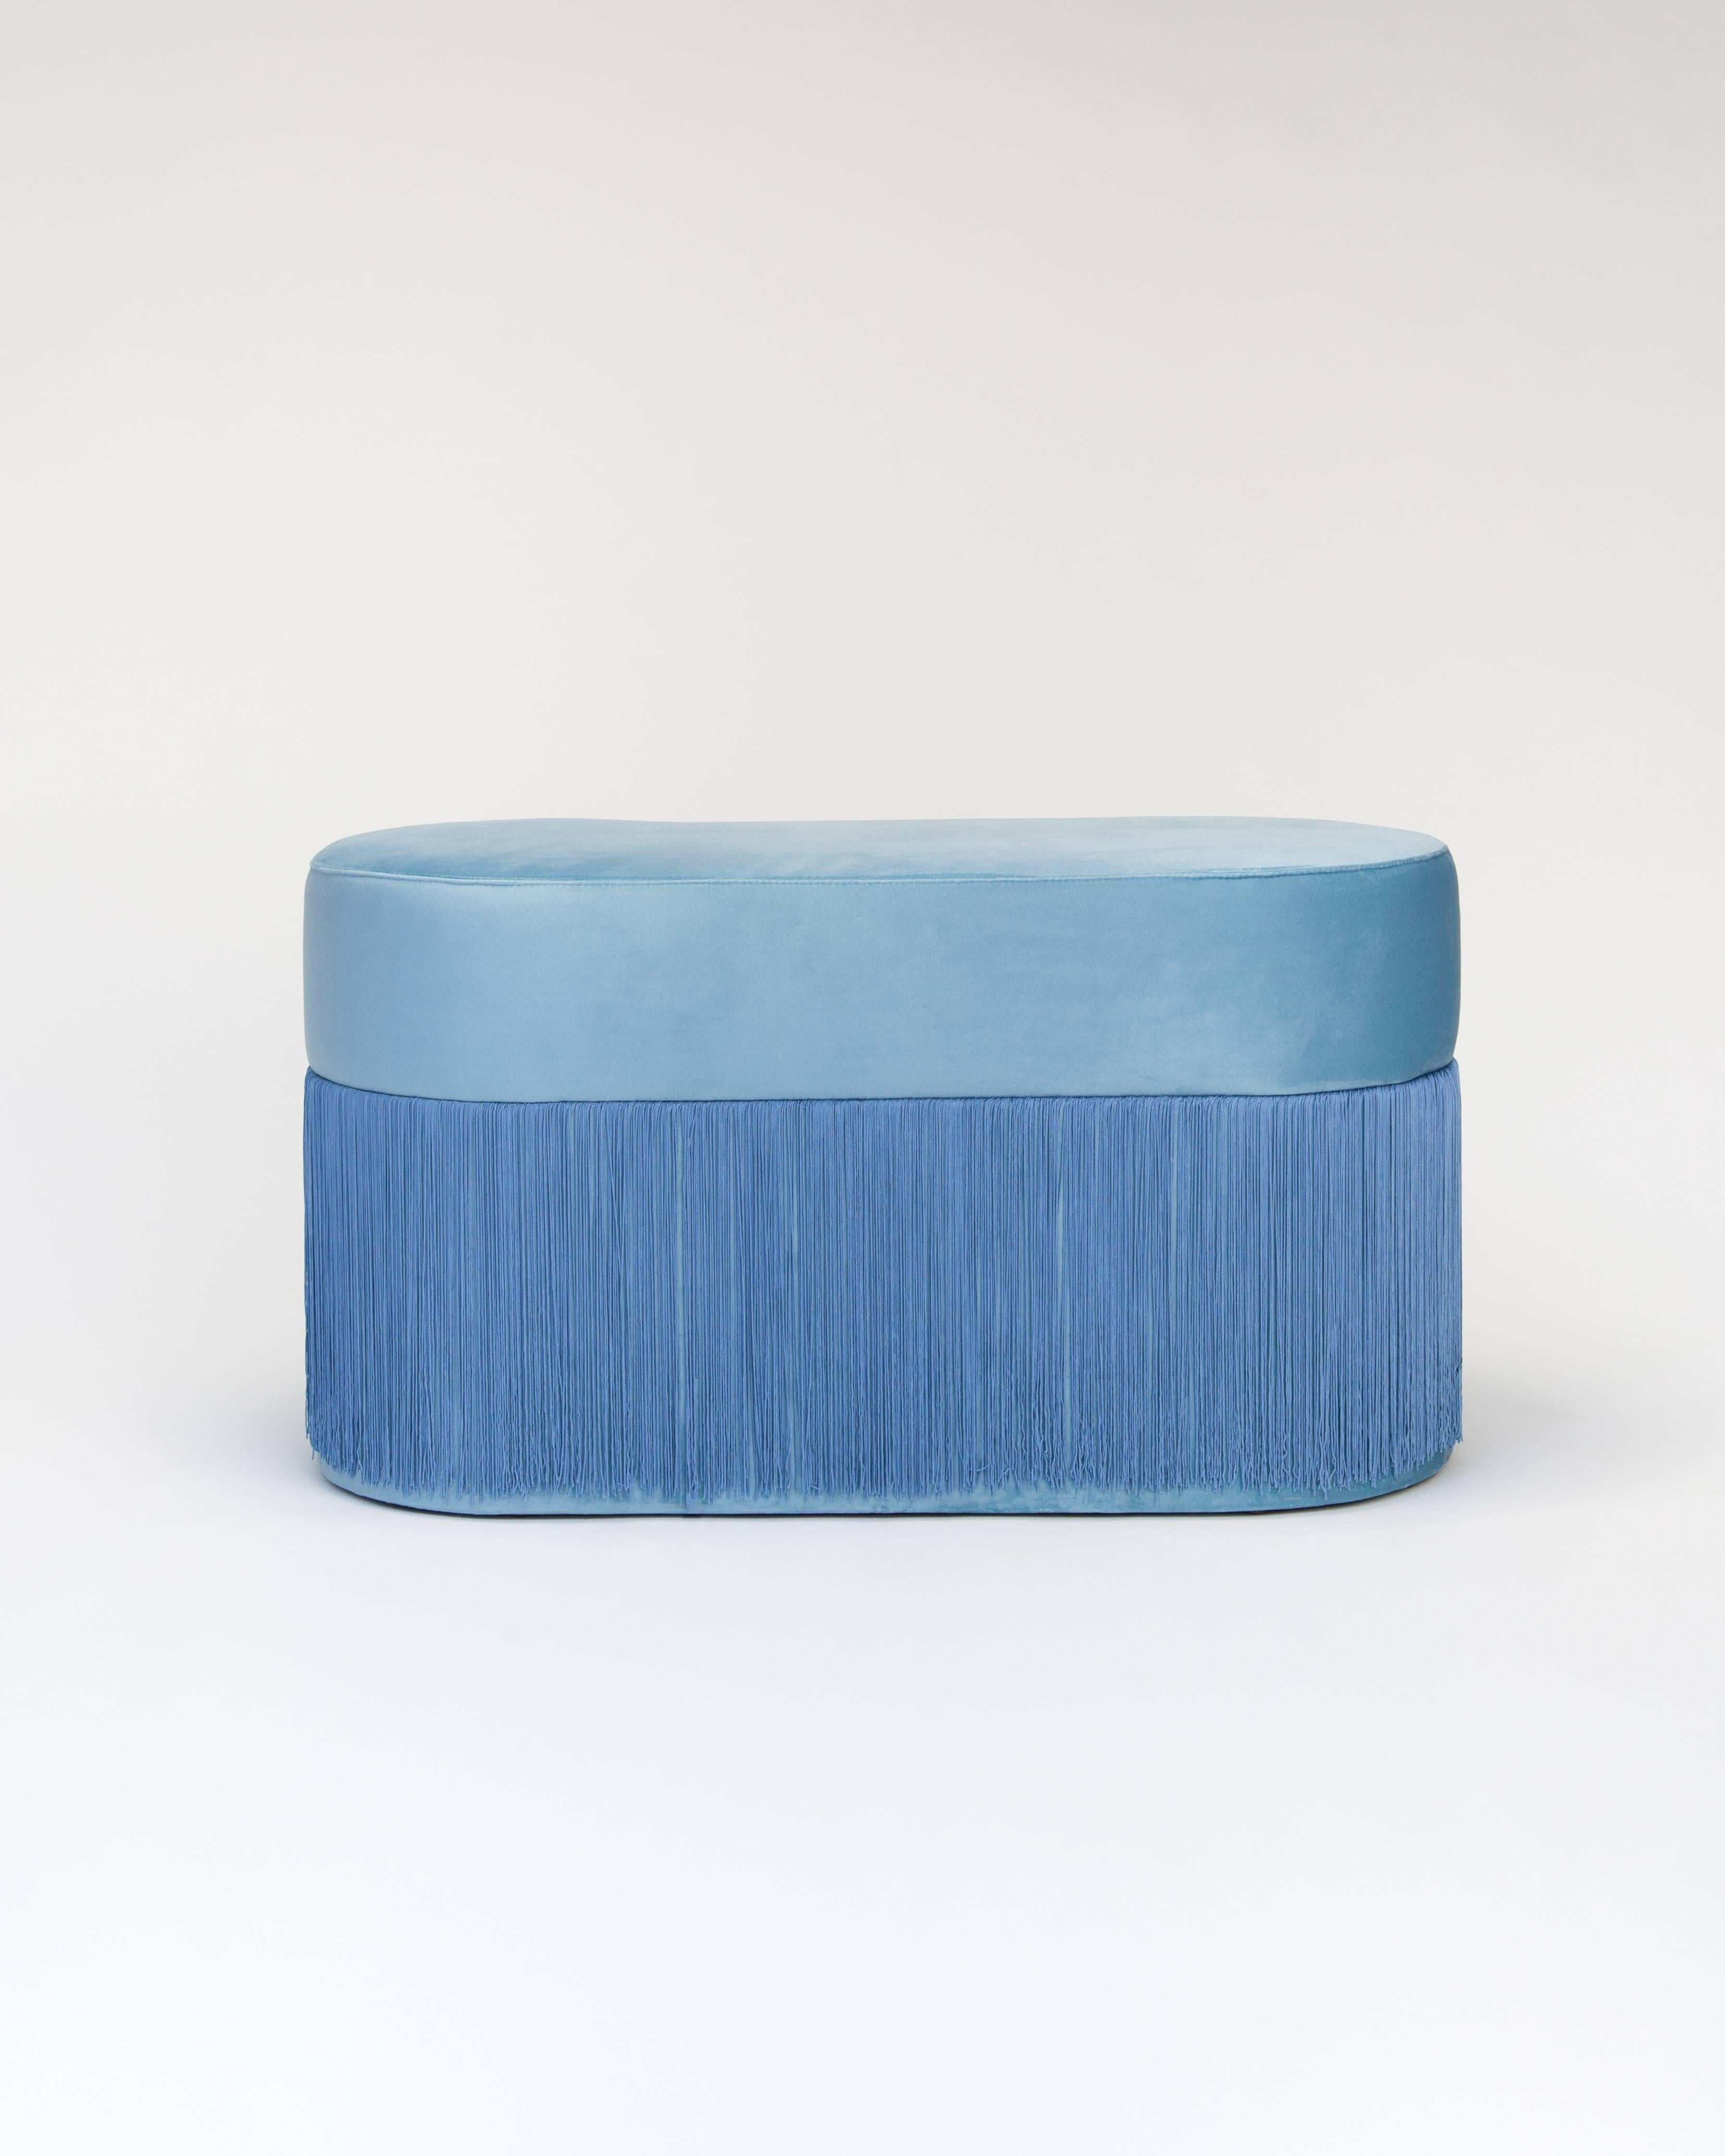 Pair of Pouf Pill Small and Large Blue in Velvet Upholstery and Fringes im Zustand „Neu“ im Angebot in Firenze, IT